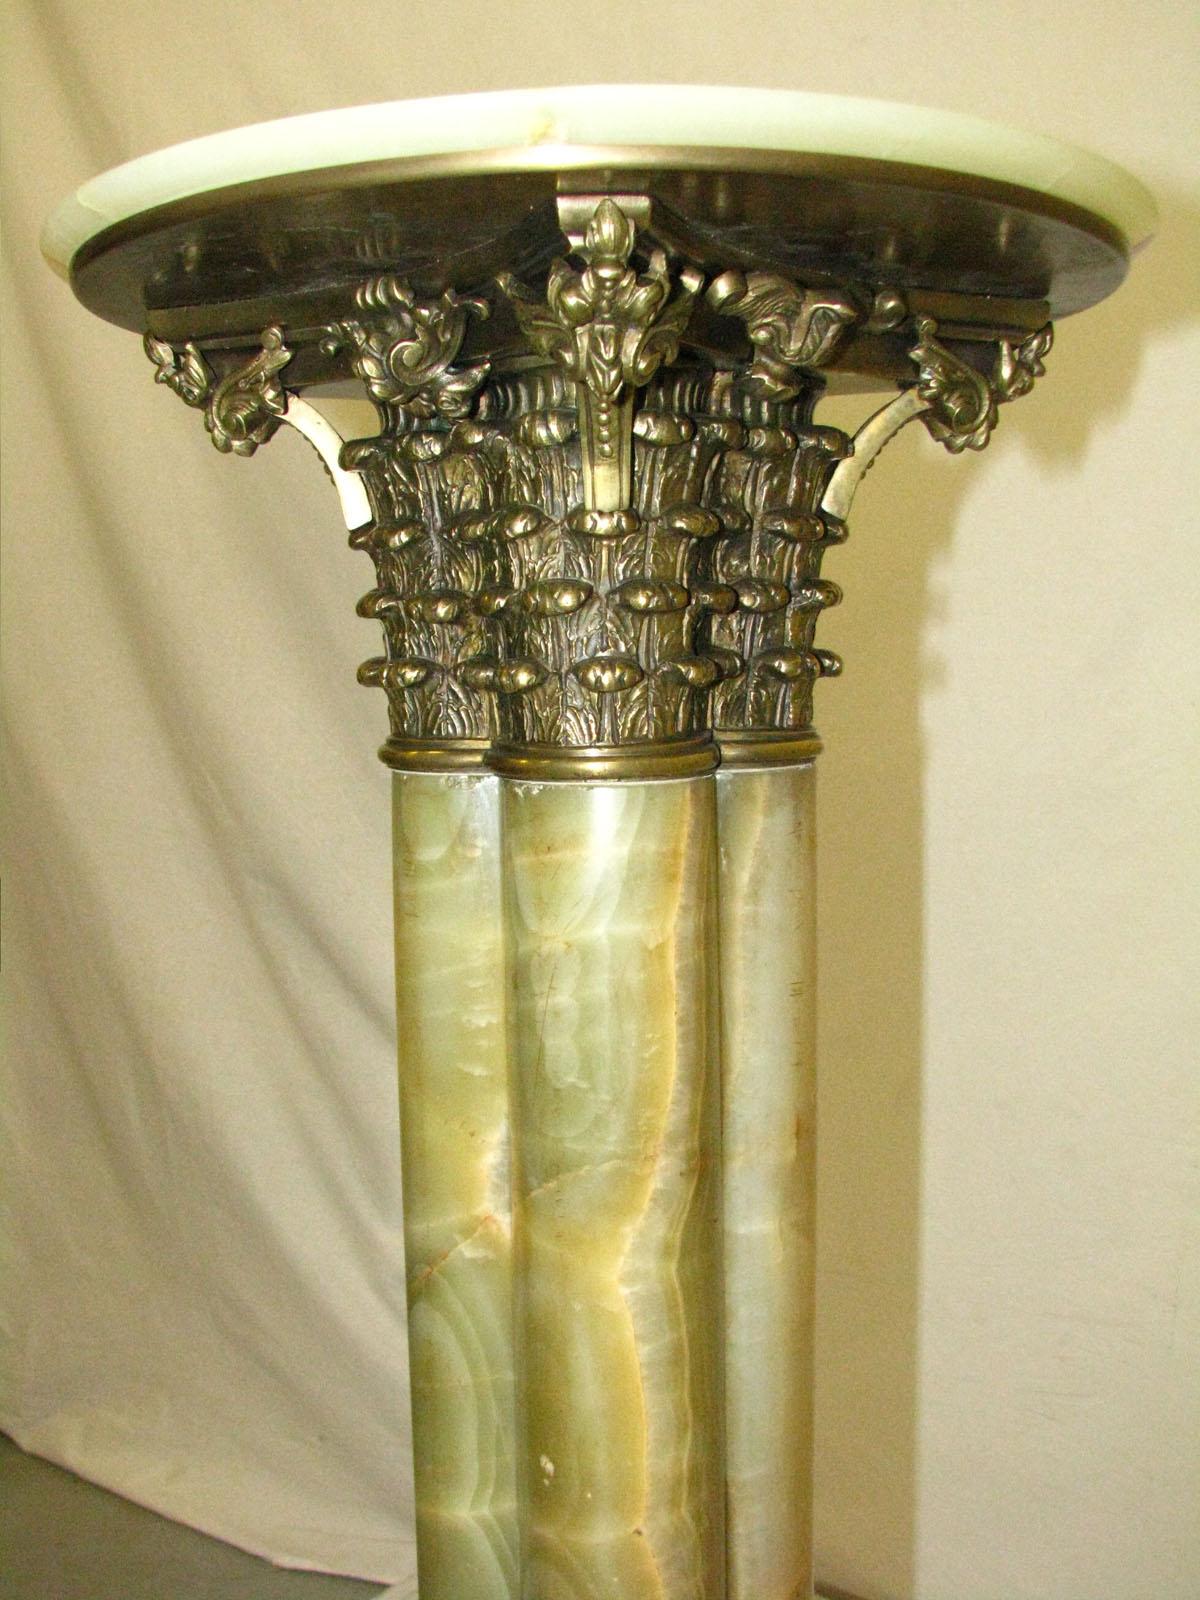 Polished Green Onyx Column / Pedestal, 20th Century For Sale 3